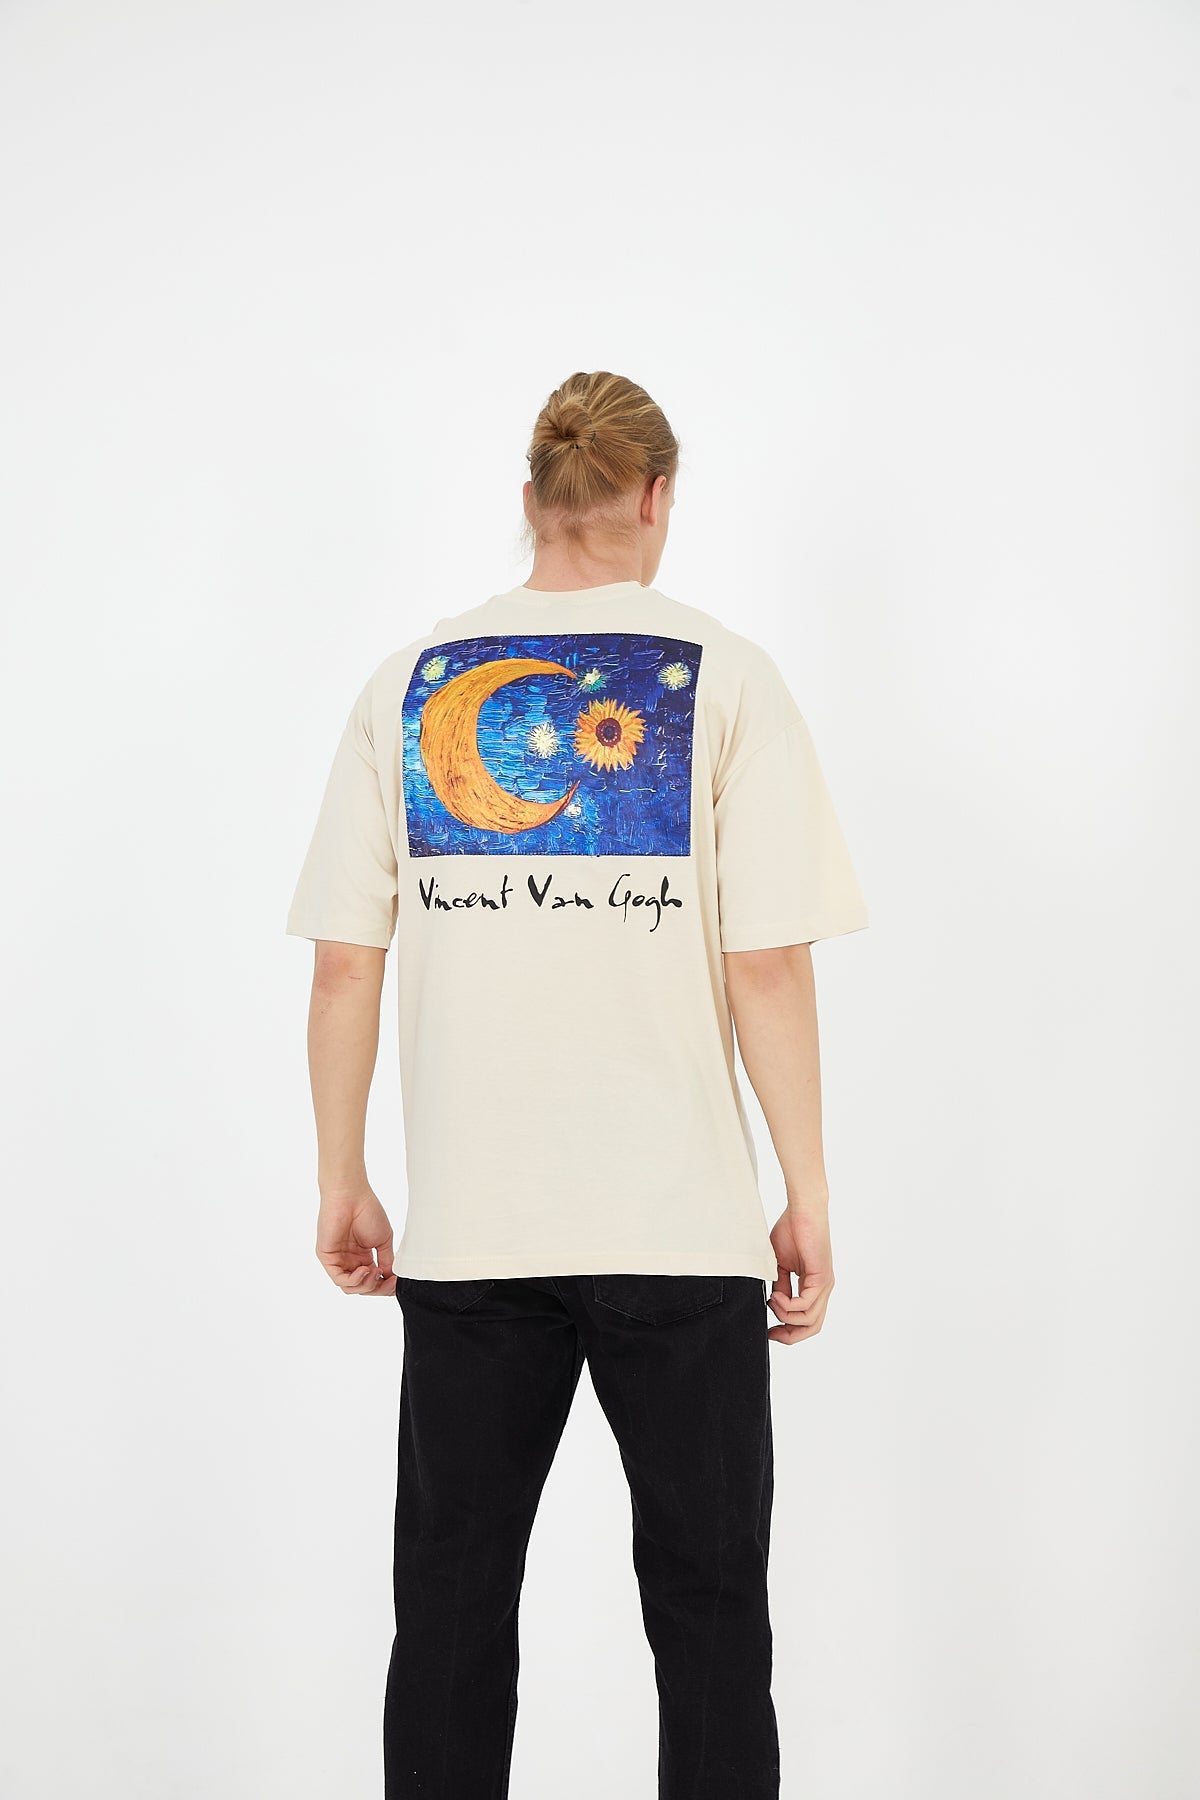 T-SHIRT - THE HILAL - OFF WHITE - DYS-Amsterdam